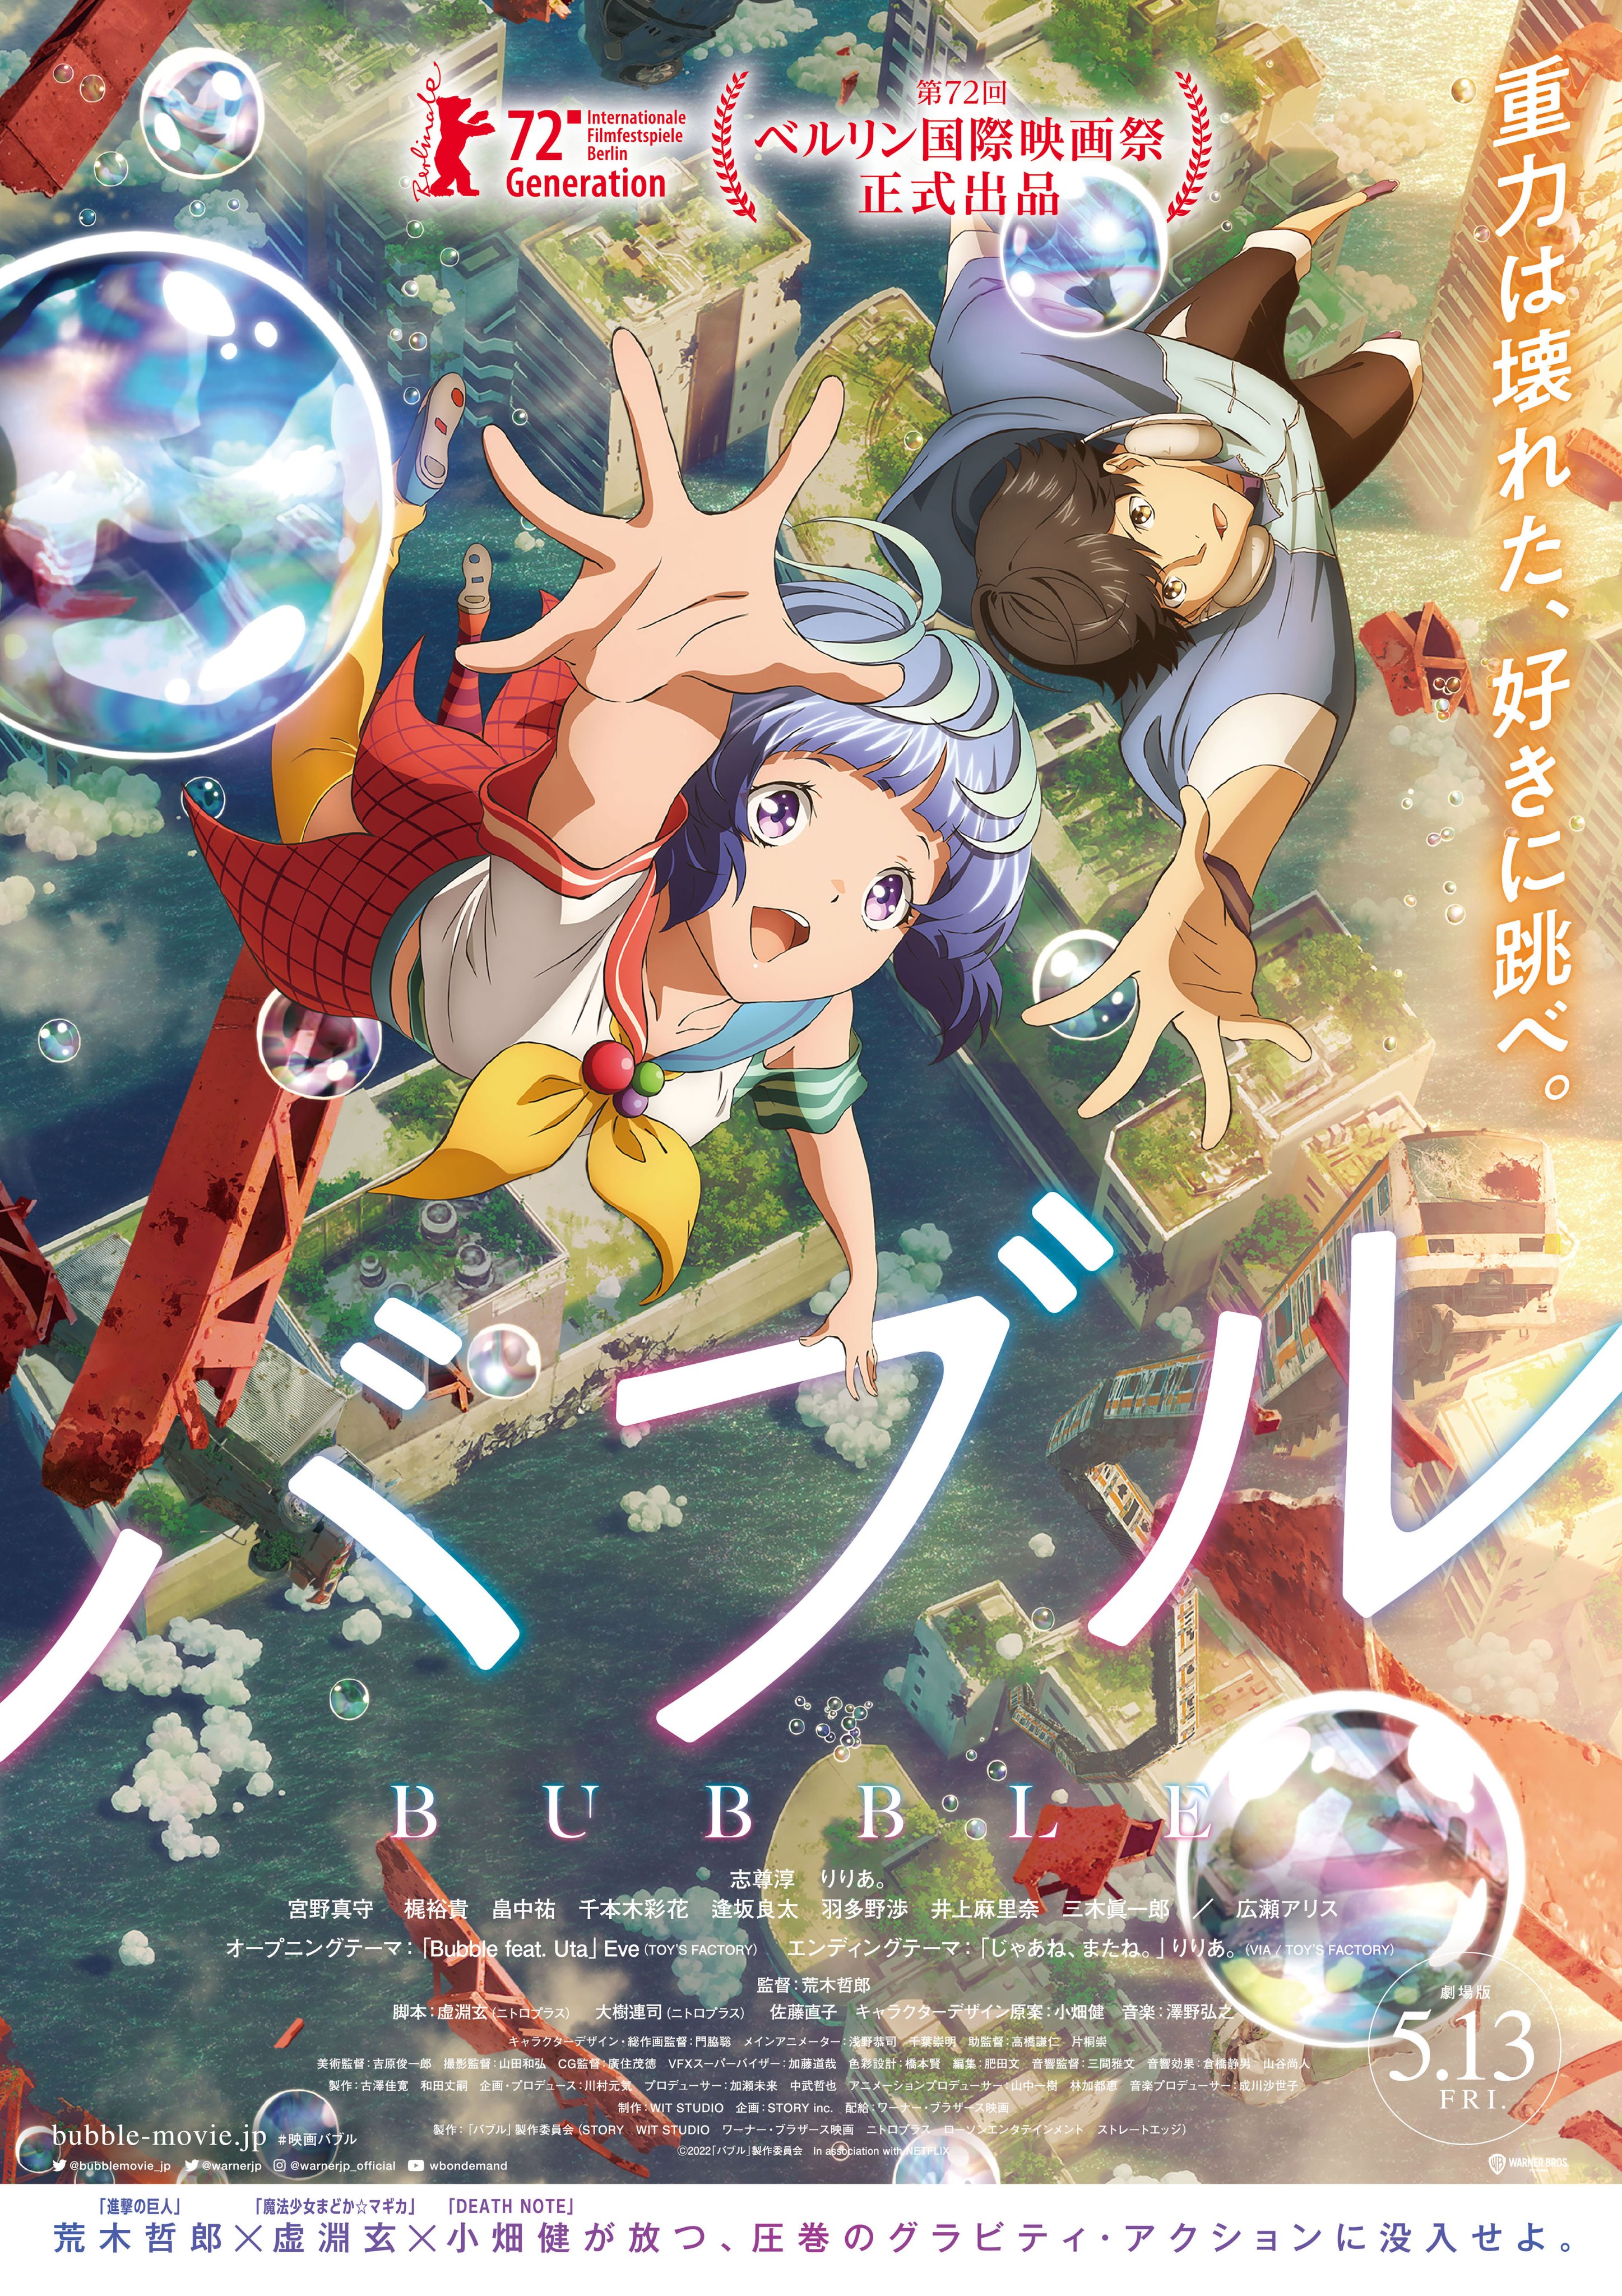 Bubble Anime Film Opening Song by Eve Now Streaming Special Website Open   MOSHI MOSHI NIPPON  もしもしにっぽん